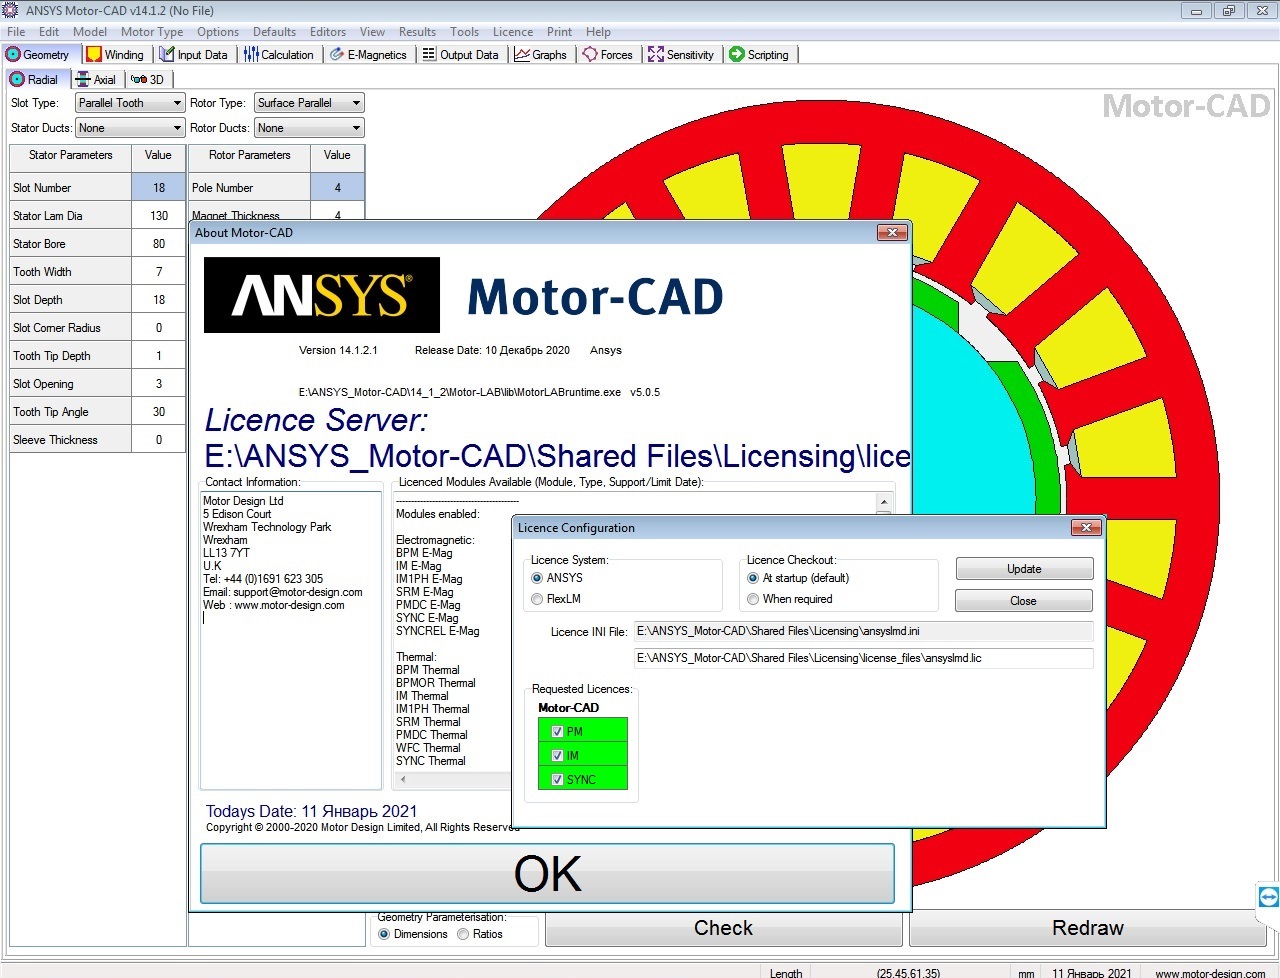 Working with ANSYS Motor-CAD v14.1.2 Win64 full